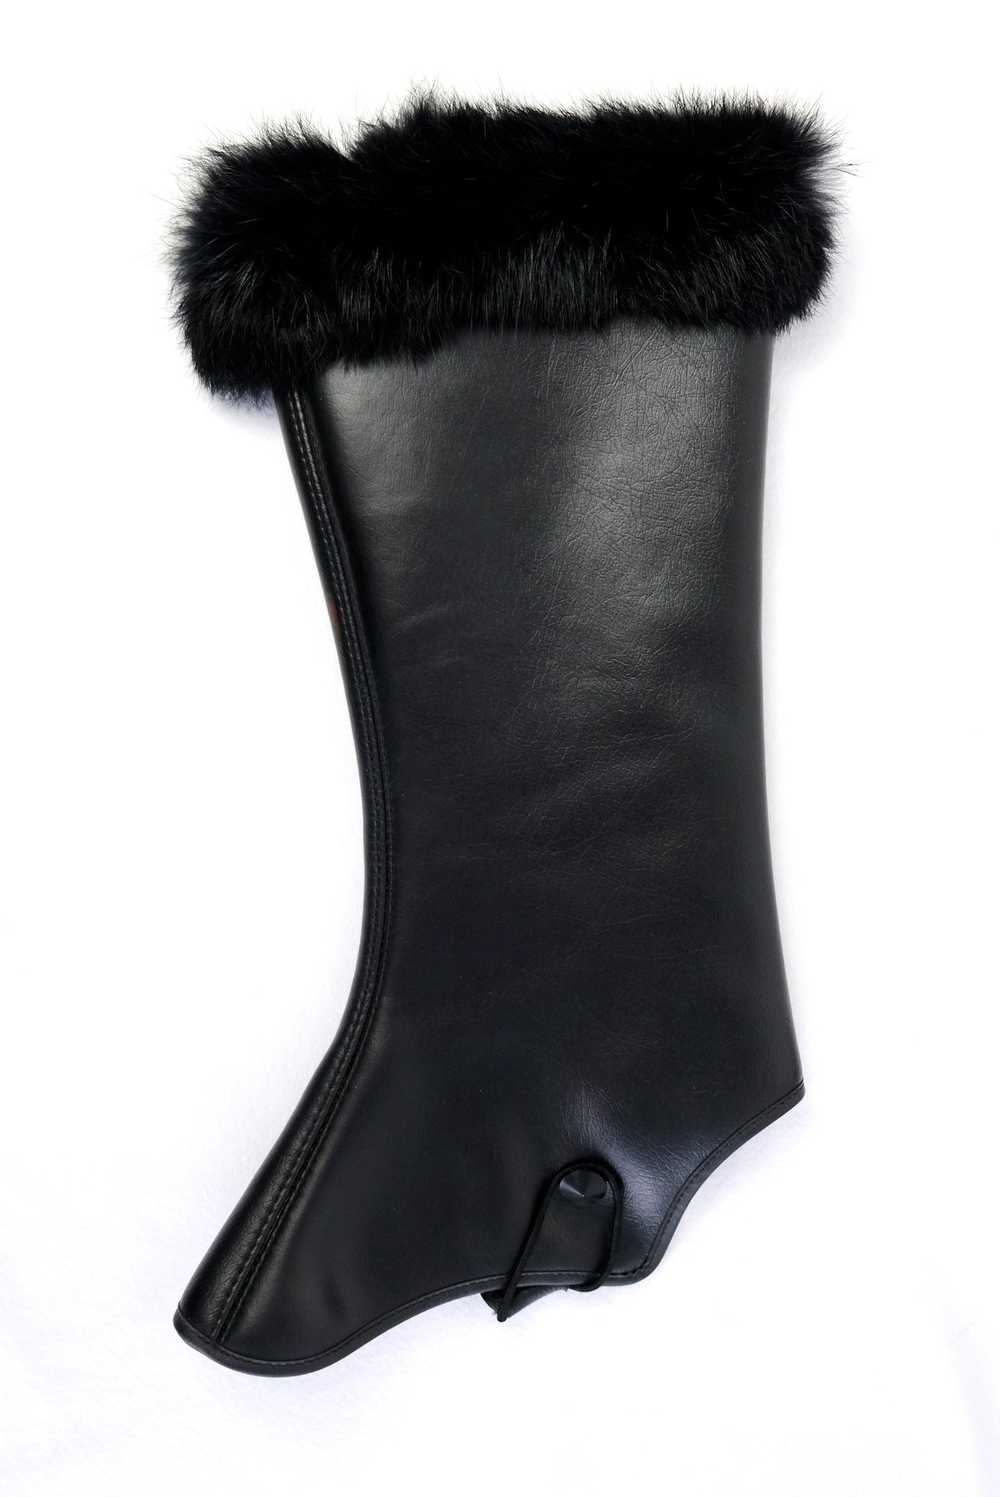 1960s Vintage Faux Leather and Fur Gaiters - image 4